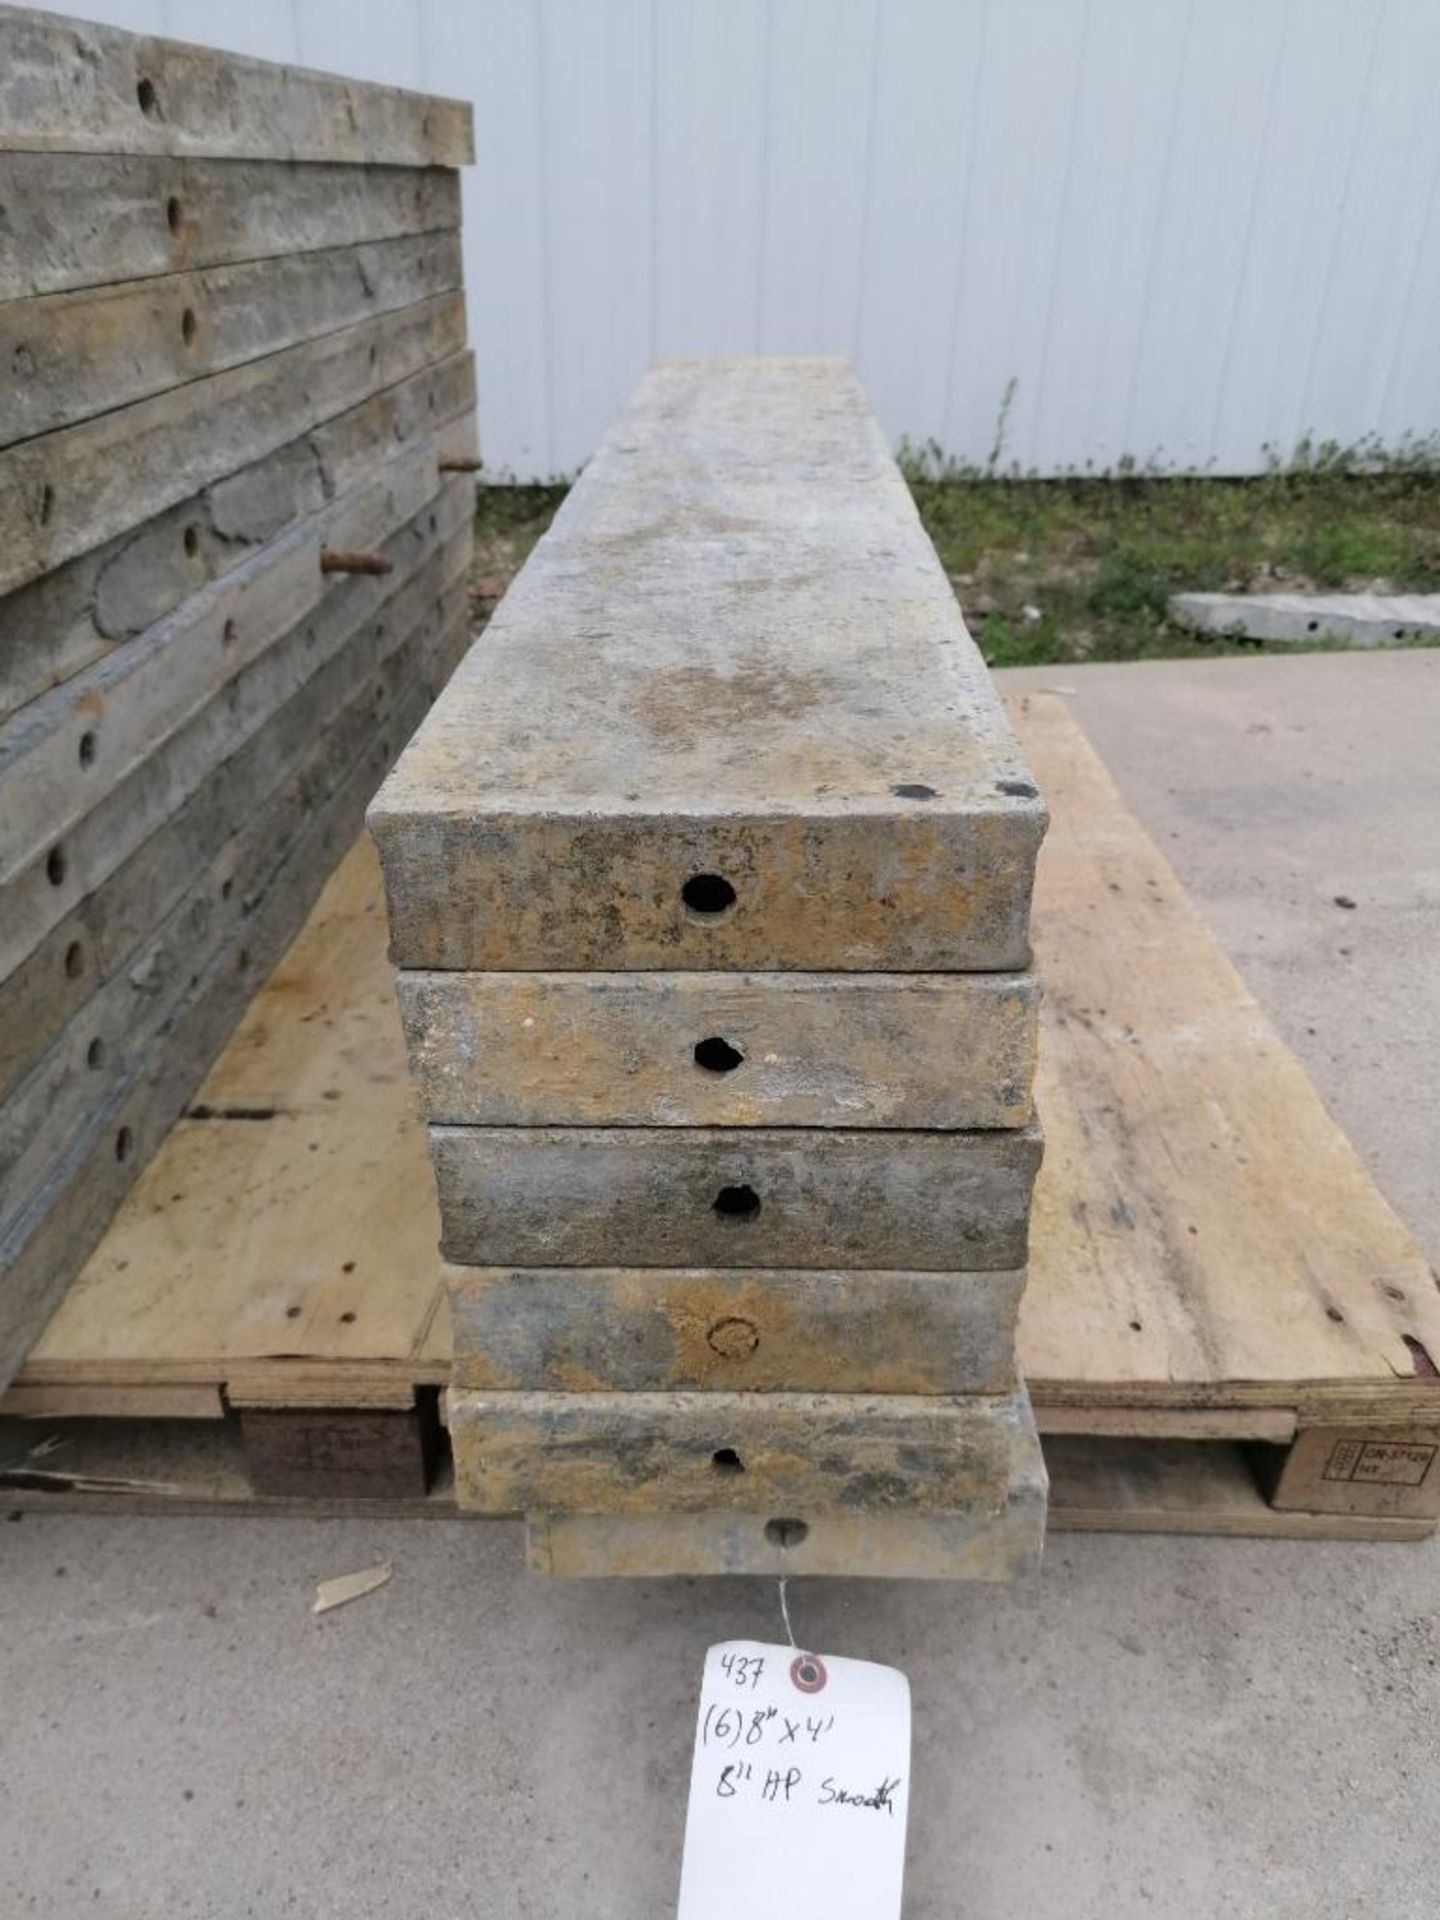 (6) 8" x 4' Wall-Ties Smooth Aluminum Concrete Forms 8" Hole Pattern. Located in Mt. Pleasant, IA.